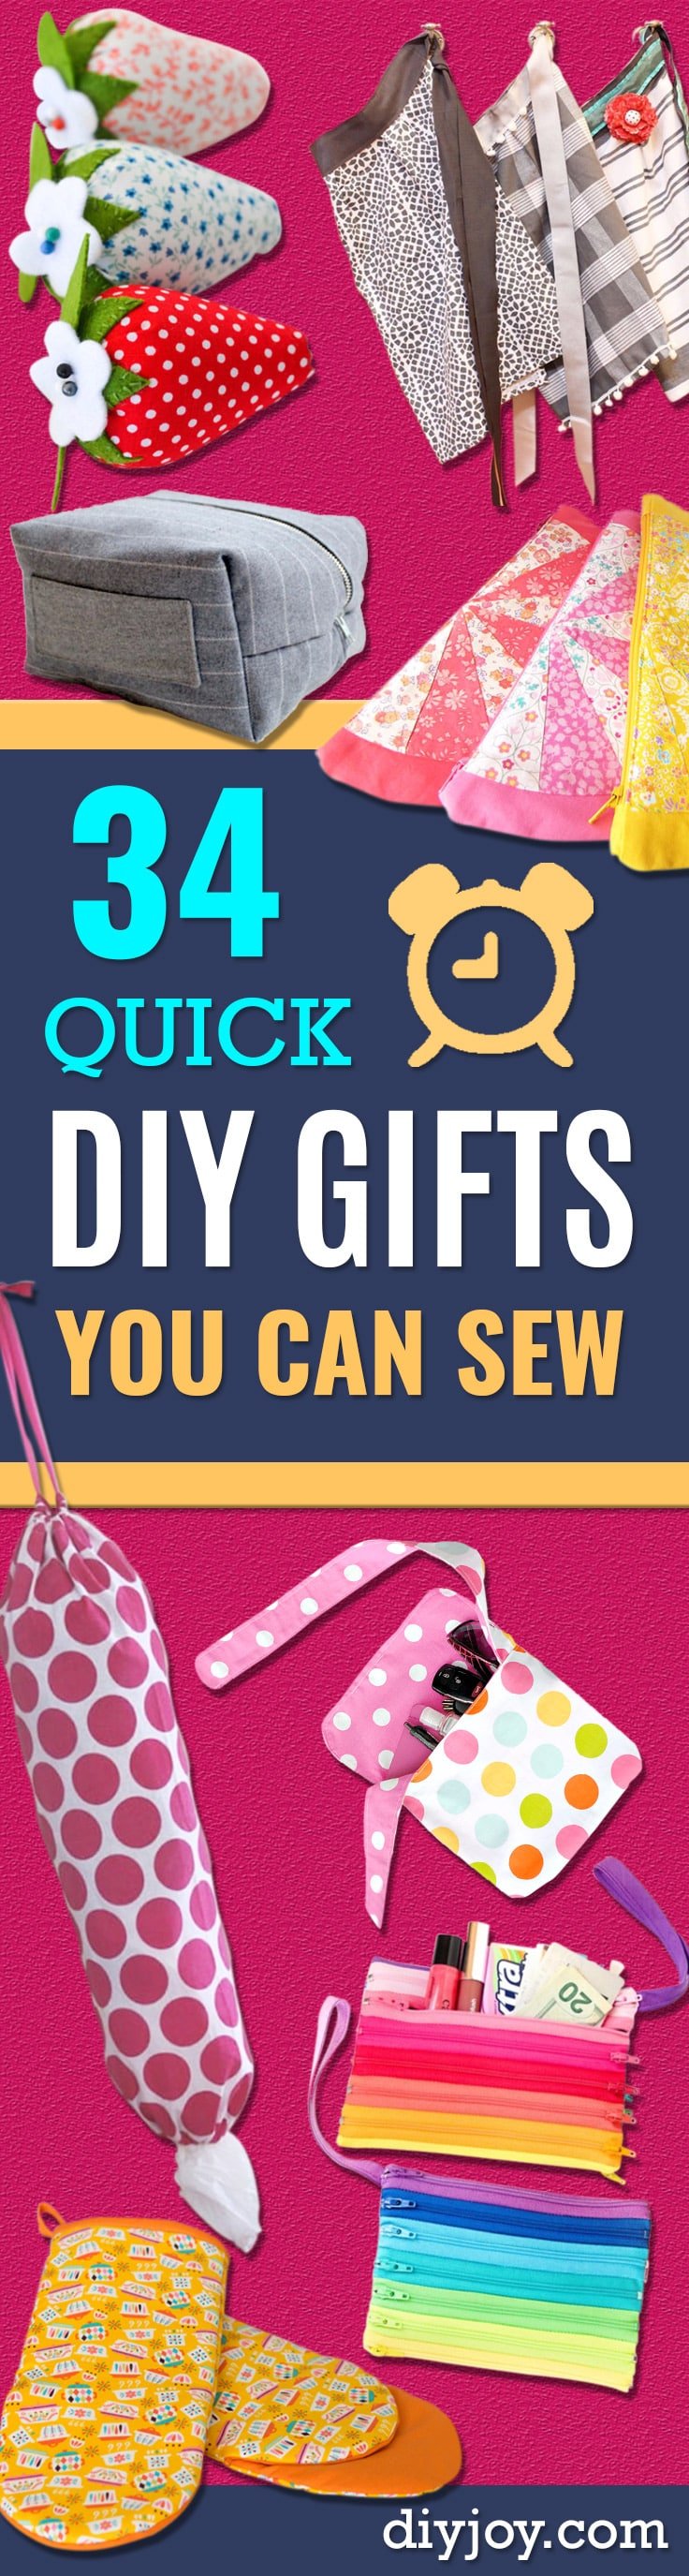 quick diy gifts to sew - Best Sewing Projects for Gift Giving and Simple Handmade Presents - Free Patterns and Easy Step by Step Tutorials #sewing #diygifts